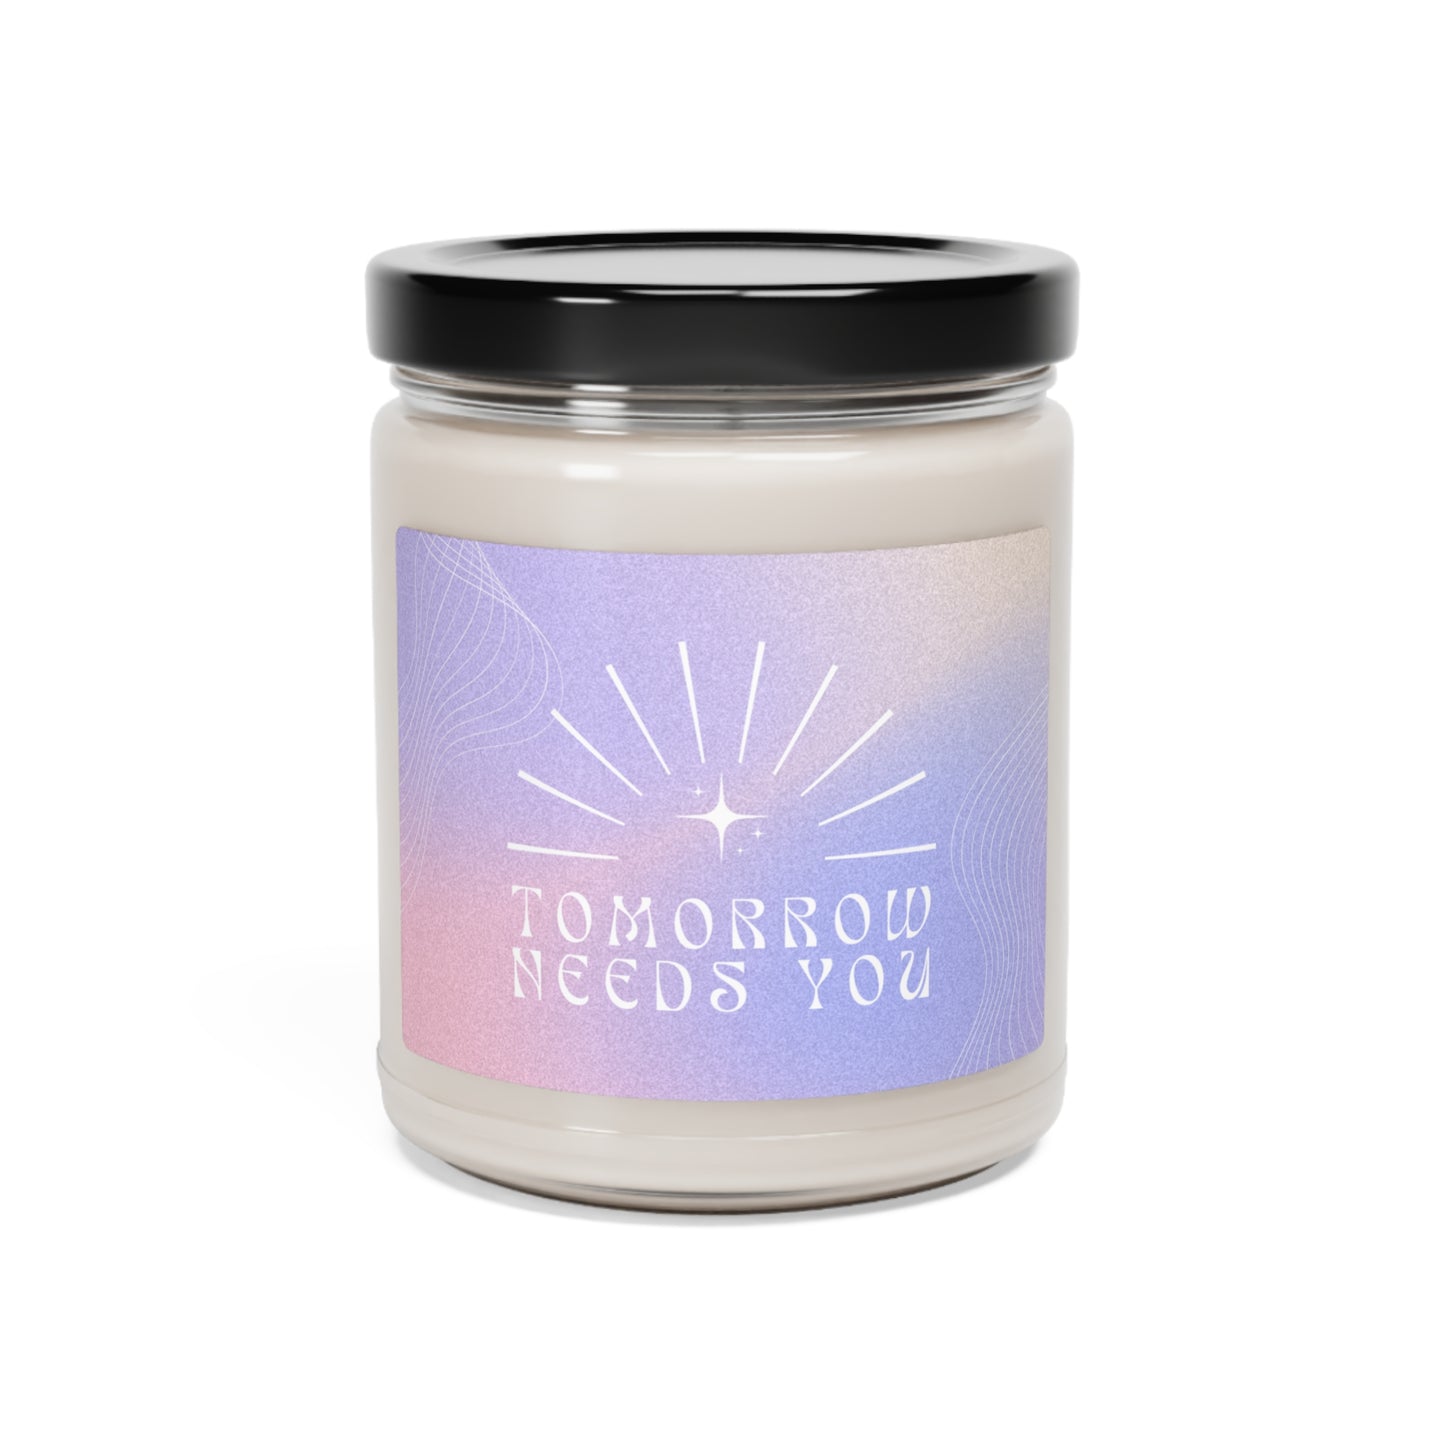 Tomorrow Needs You Clean Cotton Scented Soy Self-Care Candle, 9oz